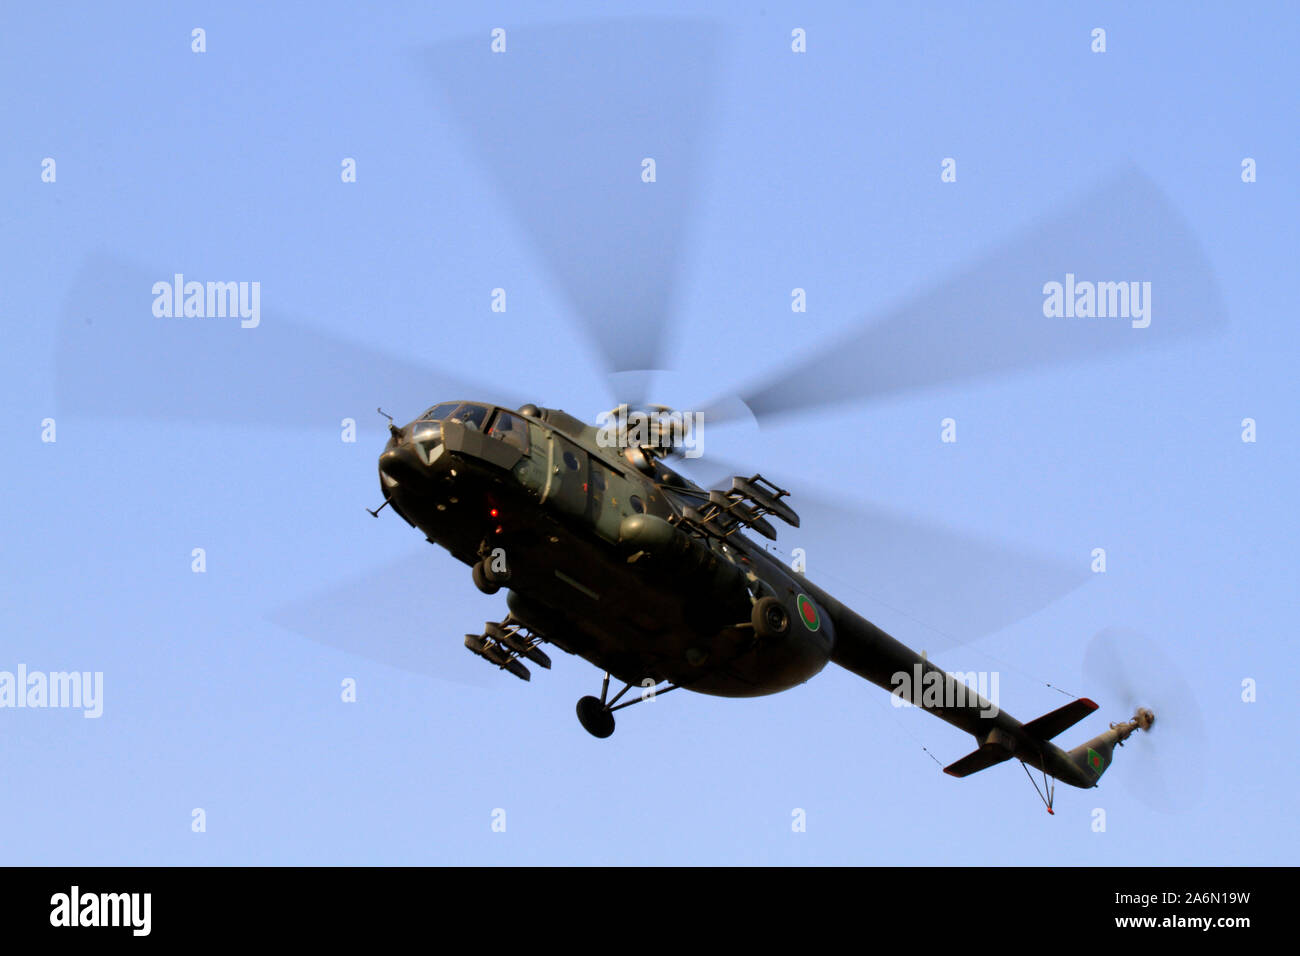 Part of heightened security during the ICC Cricket World Cup 2011, a helicopter flies over Sher-e-Bangla National Stadium in Mirpur, Dhaka, Bangladesh. February 12, 2011. Stock Photo